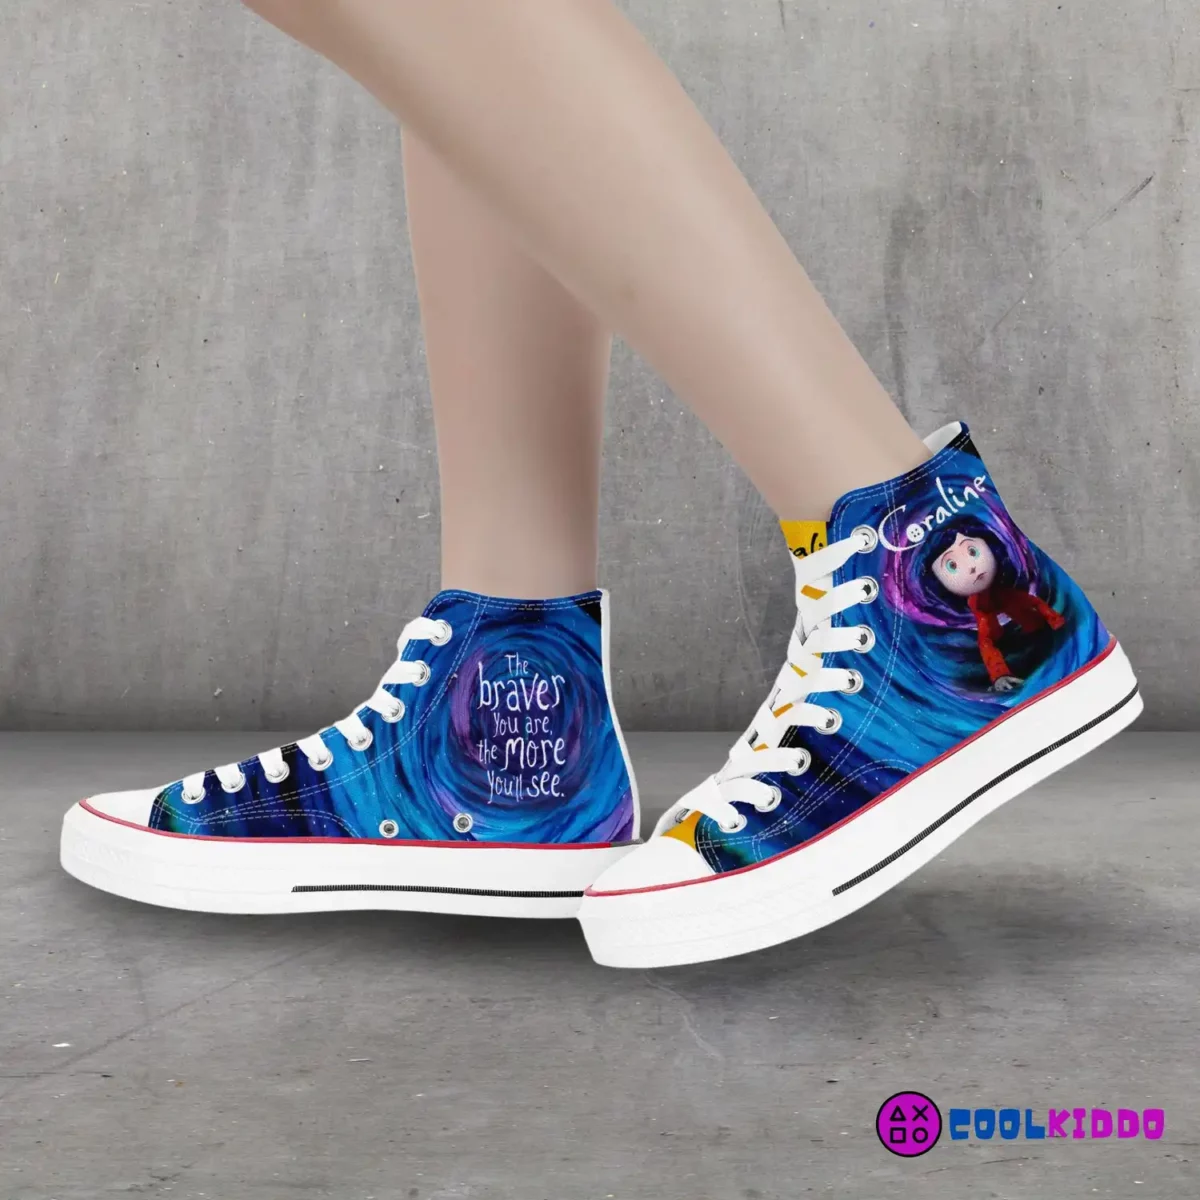 Custom Coraline High-Top Canvas Sneakers, Tim Burton’s animated movie Inspired Casual Shoes for Youth/Adults Cool Kiddo 14